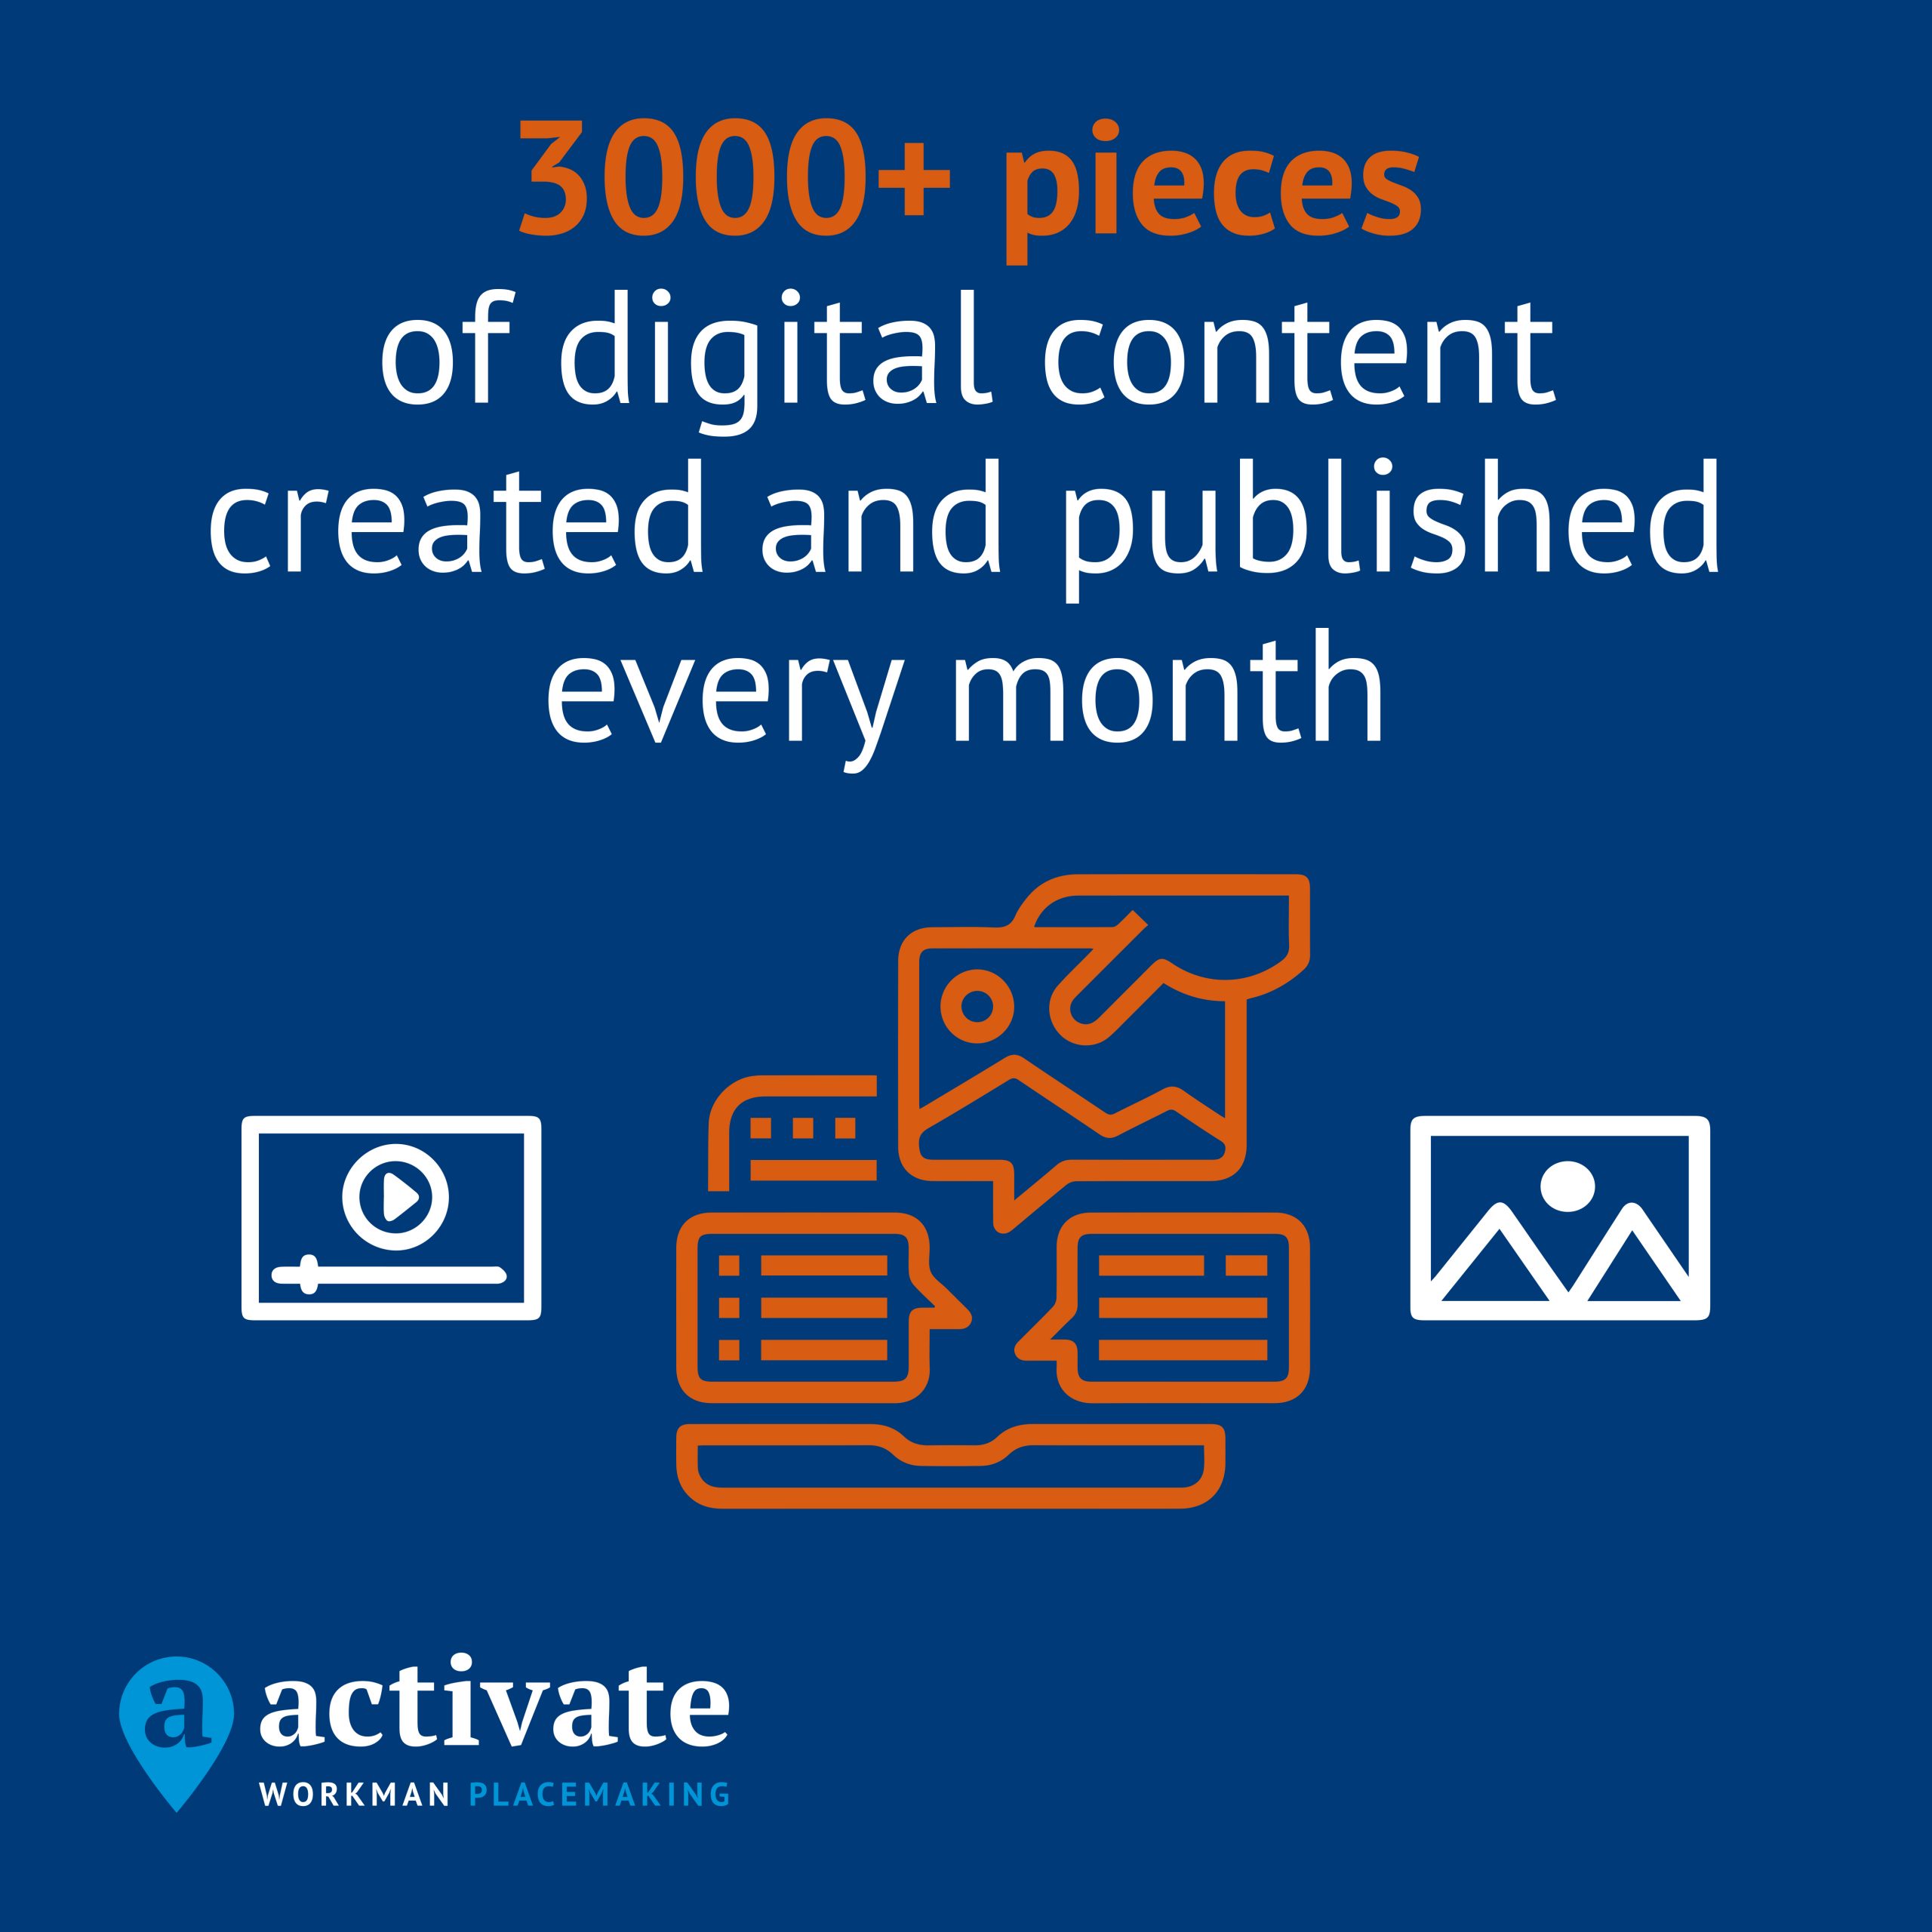 3000+ pieces of digital content created and published every month